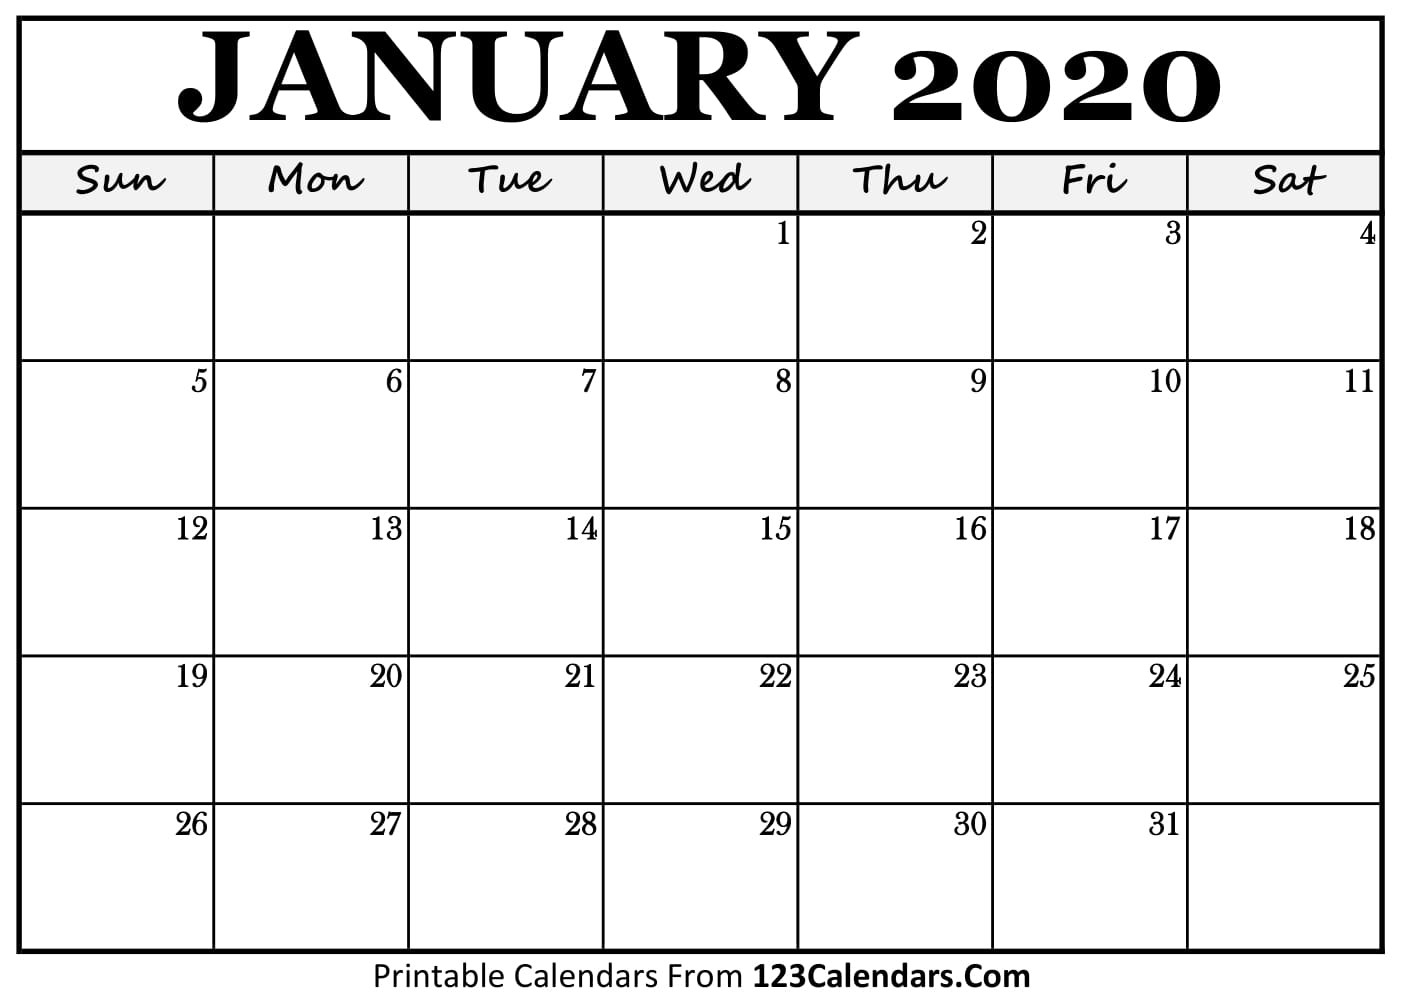 Free Printable Calendar | 123Calendars  Free Editable 2020 Monthly Calendars With Notes